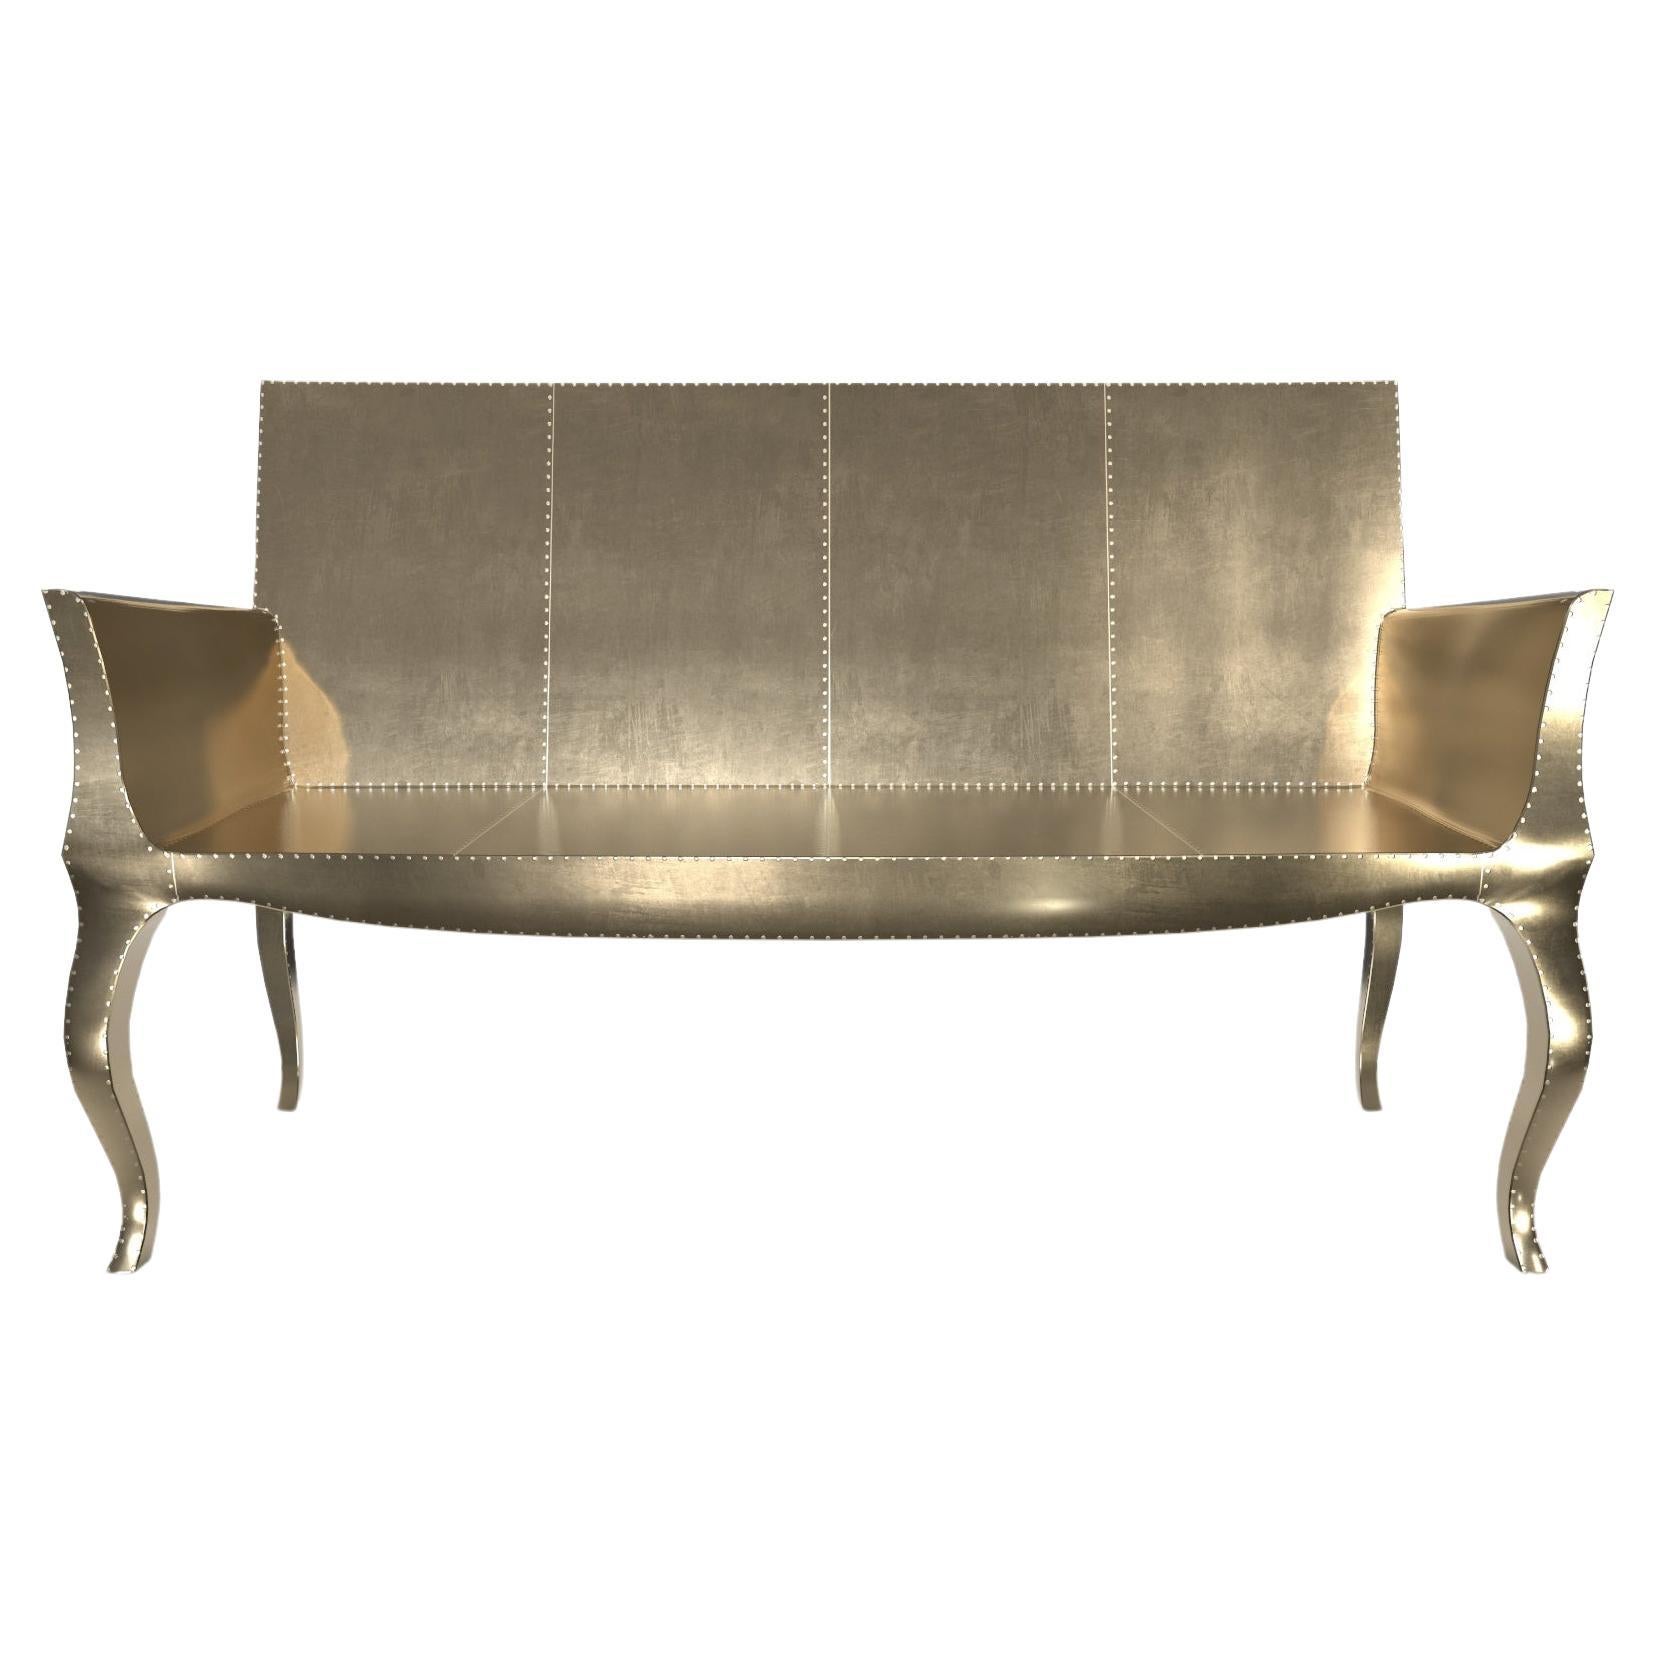 Louise Settee Art Deco Chaise Longues in Smooth Brass by Paul Mathieu